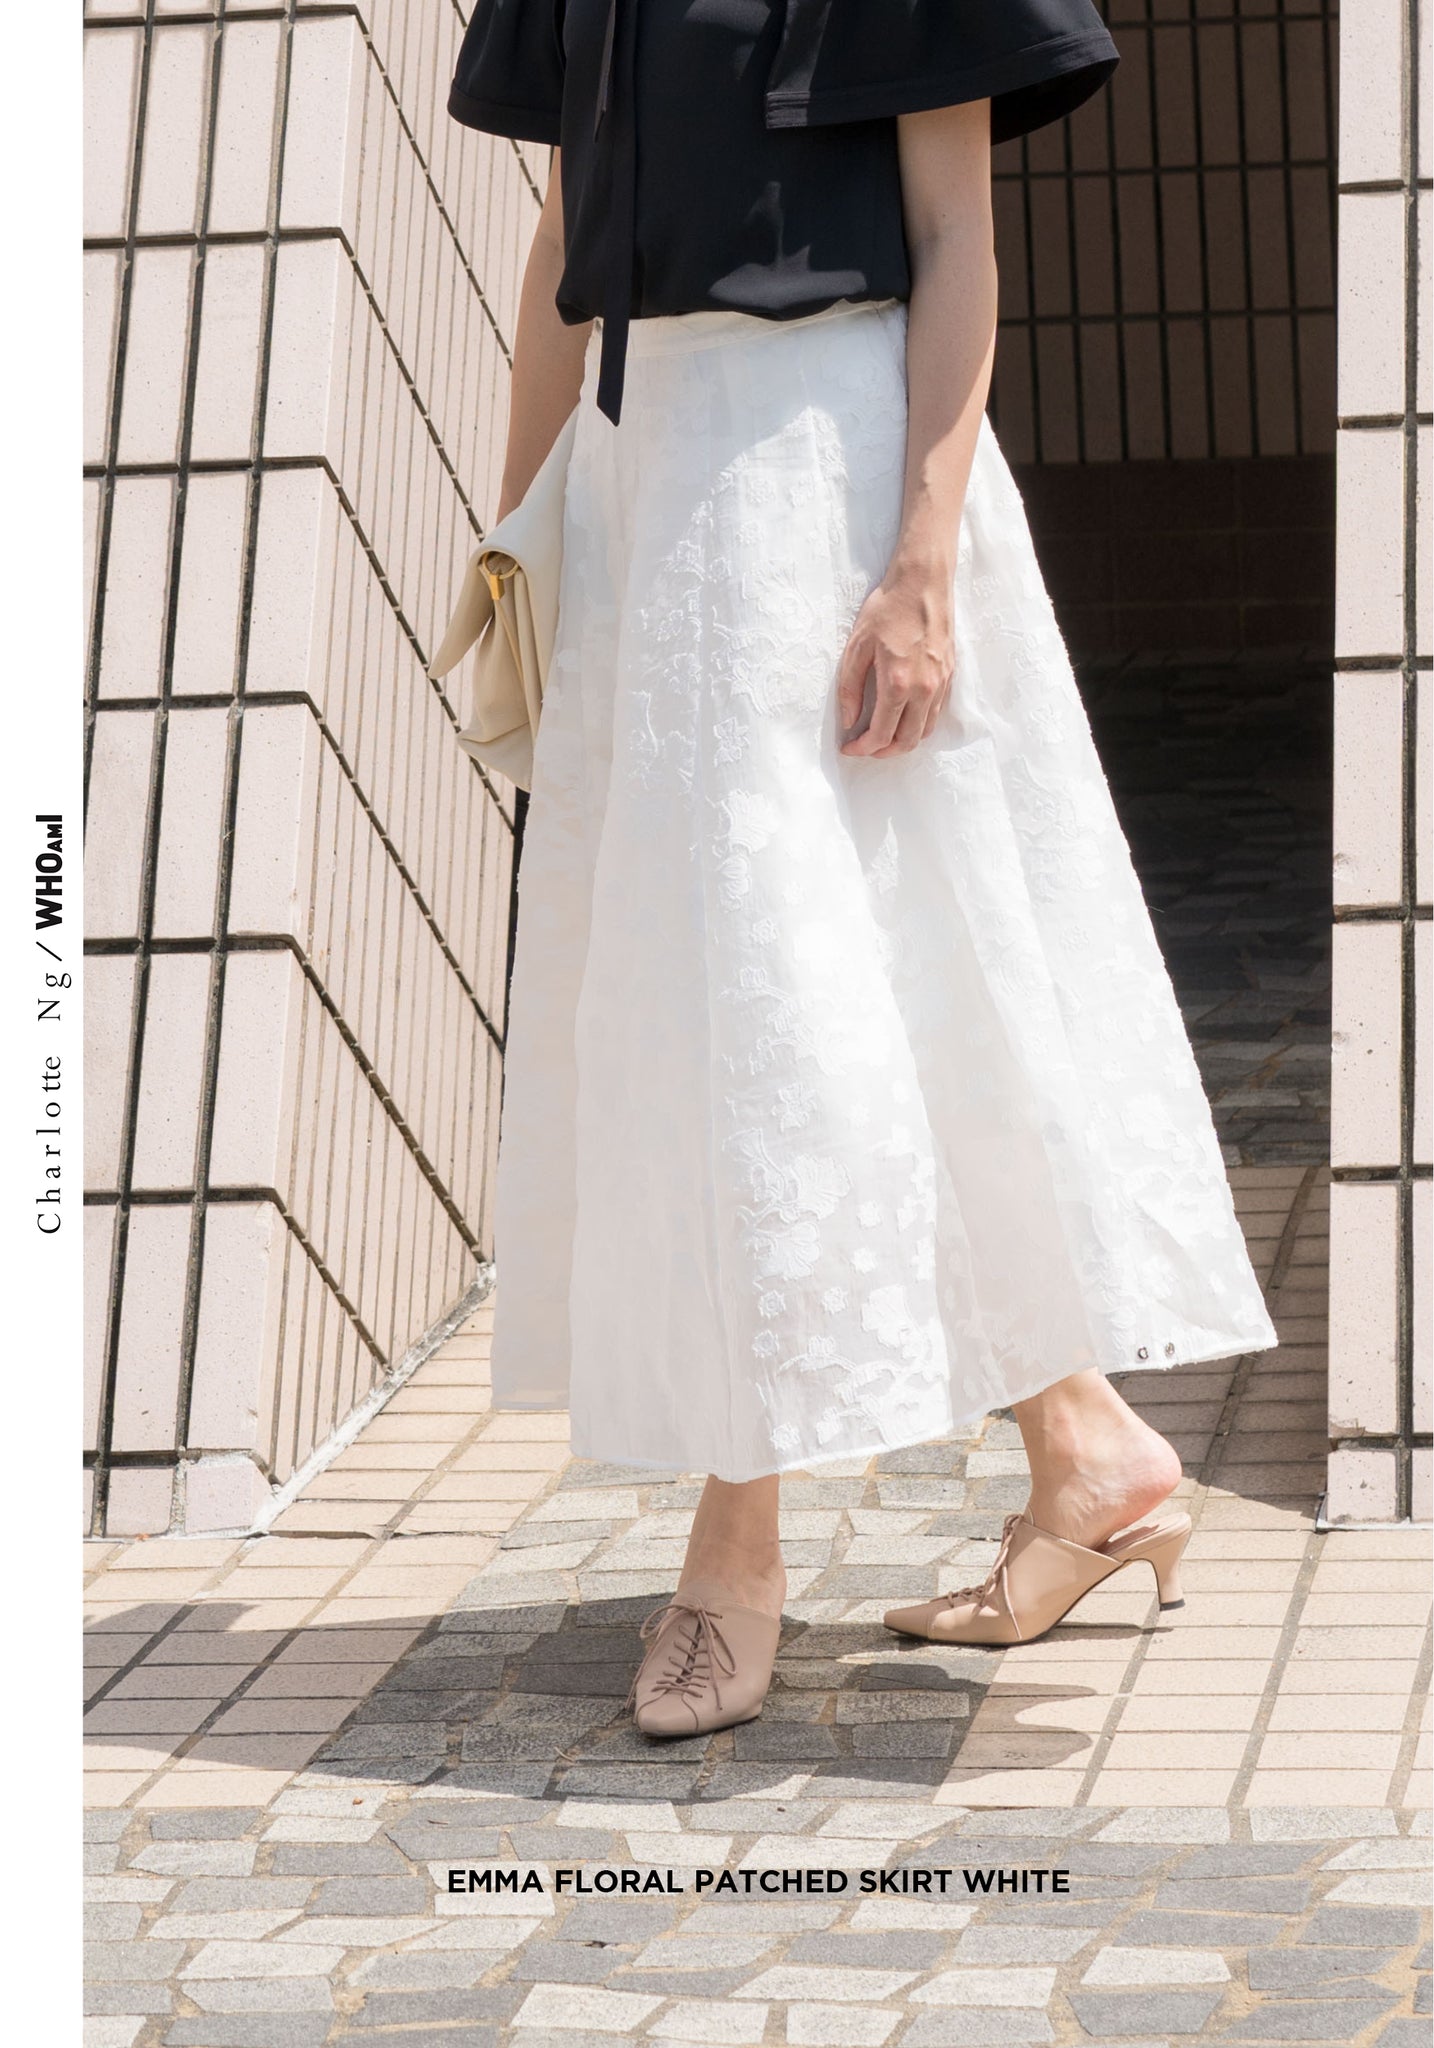 Emma Floral Patched Skirt White - whoami